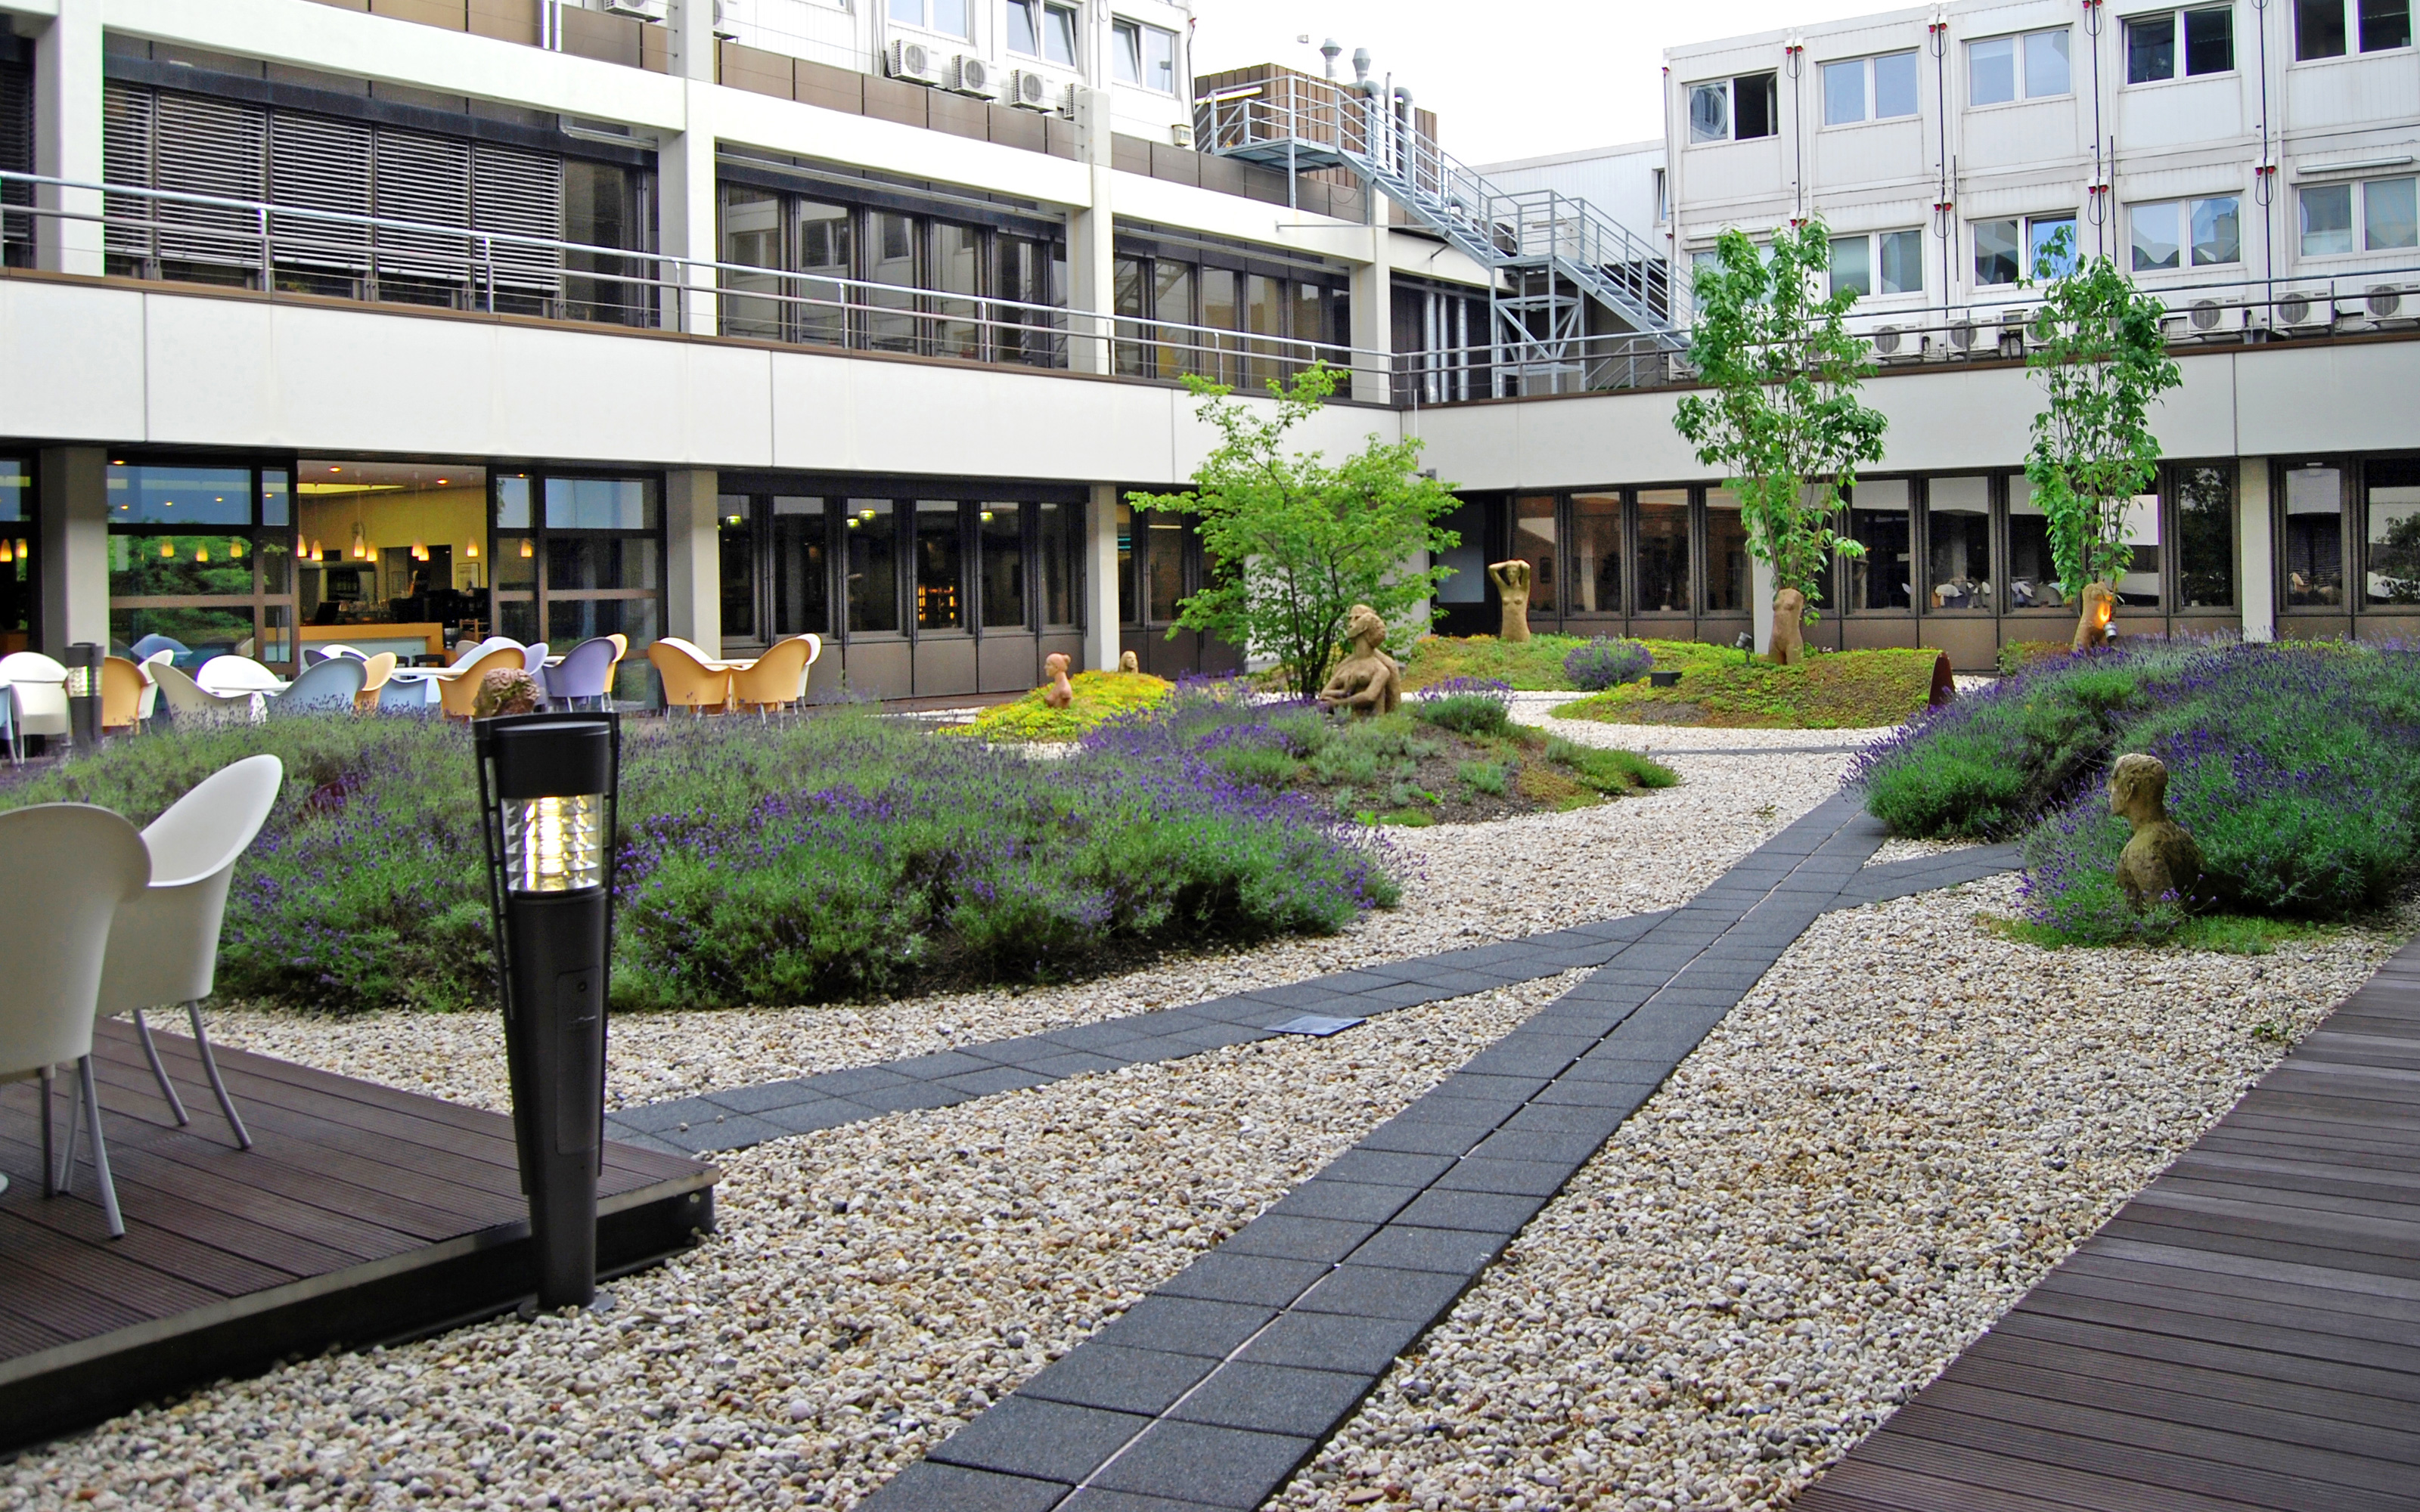 Courtyards with walkways and plant beds